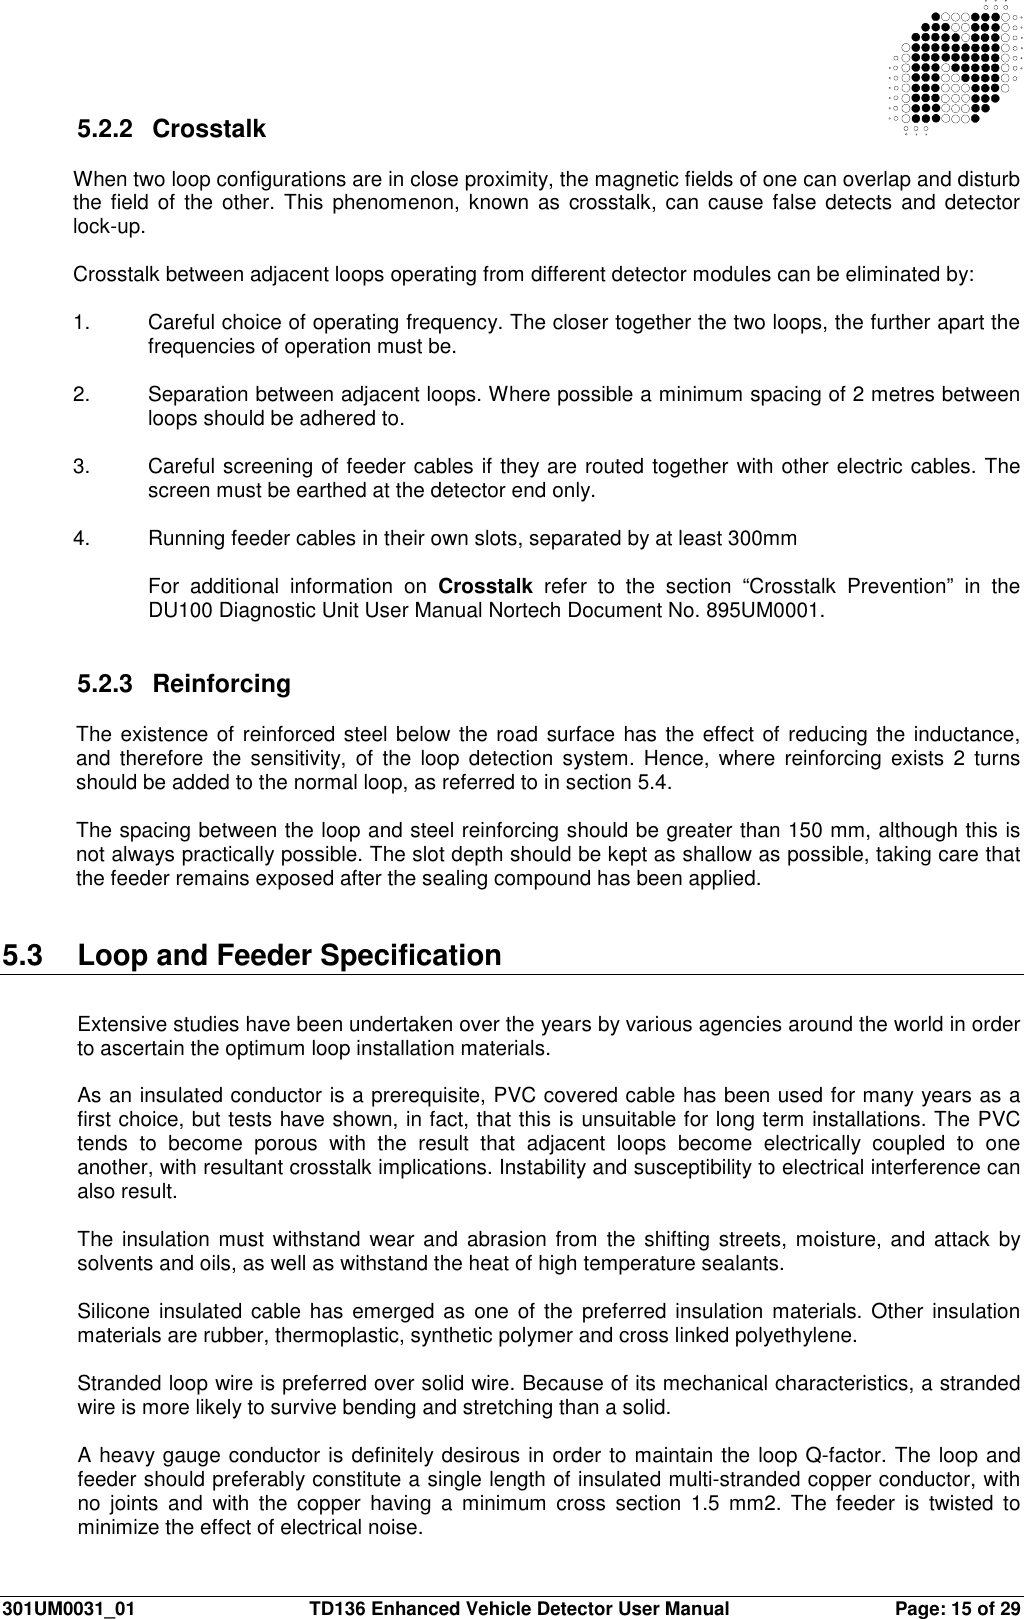  301UM0031_01  TD136 Enhanced Vehicle Detector User Manual  Page: 15 of 29   5.2.2  Crosstalk  When two loop configurations are in close proximity, the magnetic fields of one can overlap and disturb the field  of  the  other.  This  phenomenon, known  as  crosstalk, can  cause  false detects  and  detector lock-up.  Crosstalk between adjacent loops operating from different detector modules can be eliminated by:  1.  Careful choice of operating frequency. The closer together the two loops, the further apart the frequencies of operation must be.  2.  Separation between adjacent loops. Where possible a minimum spacing of 2 metres between loops should be adhered to.  3.  Careful screening of feeder cables if they are routed together with other electric cables. The screen must be earthed at the detector end only.  4.  Running feeder cables in their own slots, separated by at least 300mm  For  additional  information  on  Crosstalk  refer  to  the  section  “Crosstalk  Prevention”  in  the DU100 Diagnostic Unit User Manual Nortech Document No. 895UM0001.   5.2.3  Reinforcing  The existence of reinforced steel below  the road surface has the effect of reducing the inductance, and  therefore  the sensitivity,  of  the  loop  detection  system.  Hence,  where  reinforcing  exists  2  turns should be added to the normal loop, as referred to in section 5.4.  The spacing between the loop and steel reinforcing should be greater than 150 mm, although this is not always practically possible. The slot depth should be kept as shallow as possible, taking care that the feeder remains exposed after the sealing compound has been applied.   5.3  Loop and Feeder Specification  Extensive studies have been undertaken over the years by various agencies around the world in order to ascertain the optimum loop installation materials.  As an insulated conductor is a prerequisite, PVC covered cable has been used for many years as a first choice, but tests have shown, in fact, that this is unsuitable for long term installations. The PVC tends  to  become  porous  with  the  result  that  adjacent  loops  become  electrically  coupled  to  one another, with resultant crosstalk implications. Instability and susceptibility to electrical interference can also result.  The  insulation  must  withstand  wear  and  abrasion  from the shifting streets, moisture, and attack by solvents and oils, as well as withstand the heat of high temperature sealants.  Silicone  insulated cable  has  emerged  as  one of the preferred  insulation  materials.  Other  insulation materials are rubber, thermoplastic, synthetic polymer and cross linked polyethylene.  Stranded loop wire is preferred over solid wire. Because of its mechanical characteristics, a stranded wire is more likely to survive bending and stretching than a solid.  A heavy gauge conductor is definitely desirous in order to maintain the loop Q-factor. The loop and feeder should preferably constitute a single length of insulated multi-stranded copper conductor, with no  joints  and  with  the  copper  having  a  minimum  cross  section  1.5  mm2.  The  feeder  is  twisted  to minimize the effect of electrical noise. 